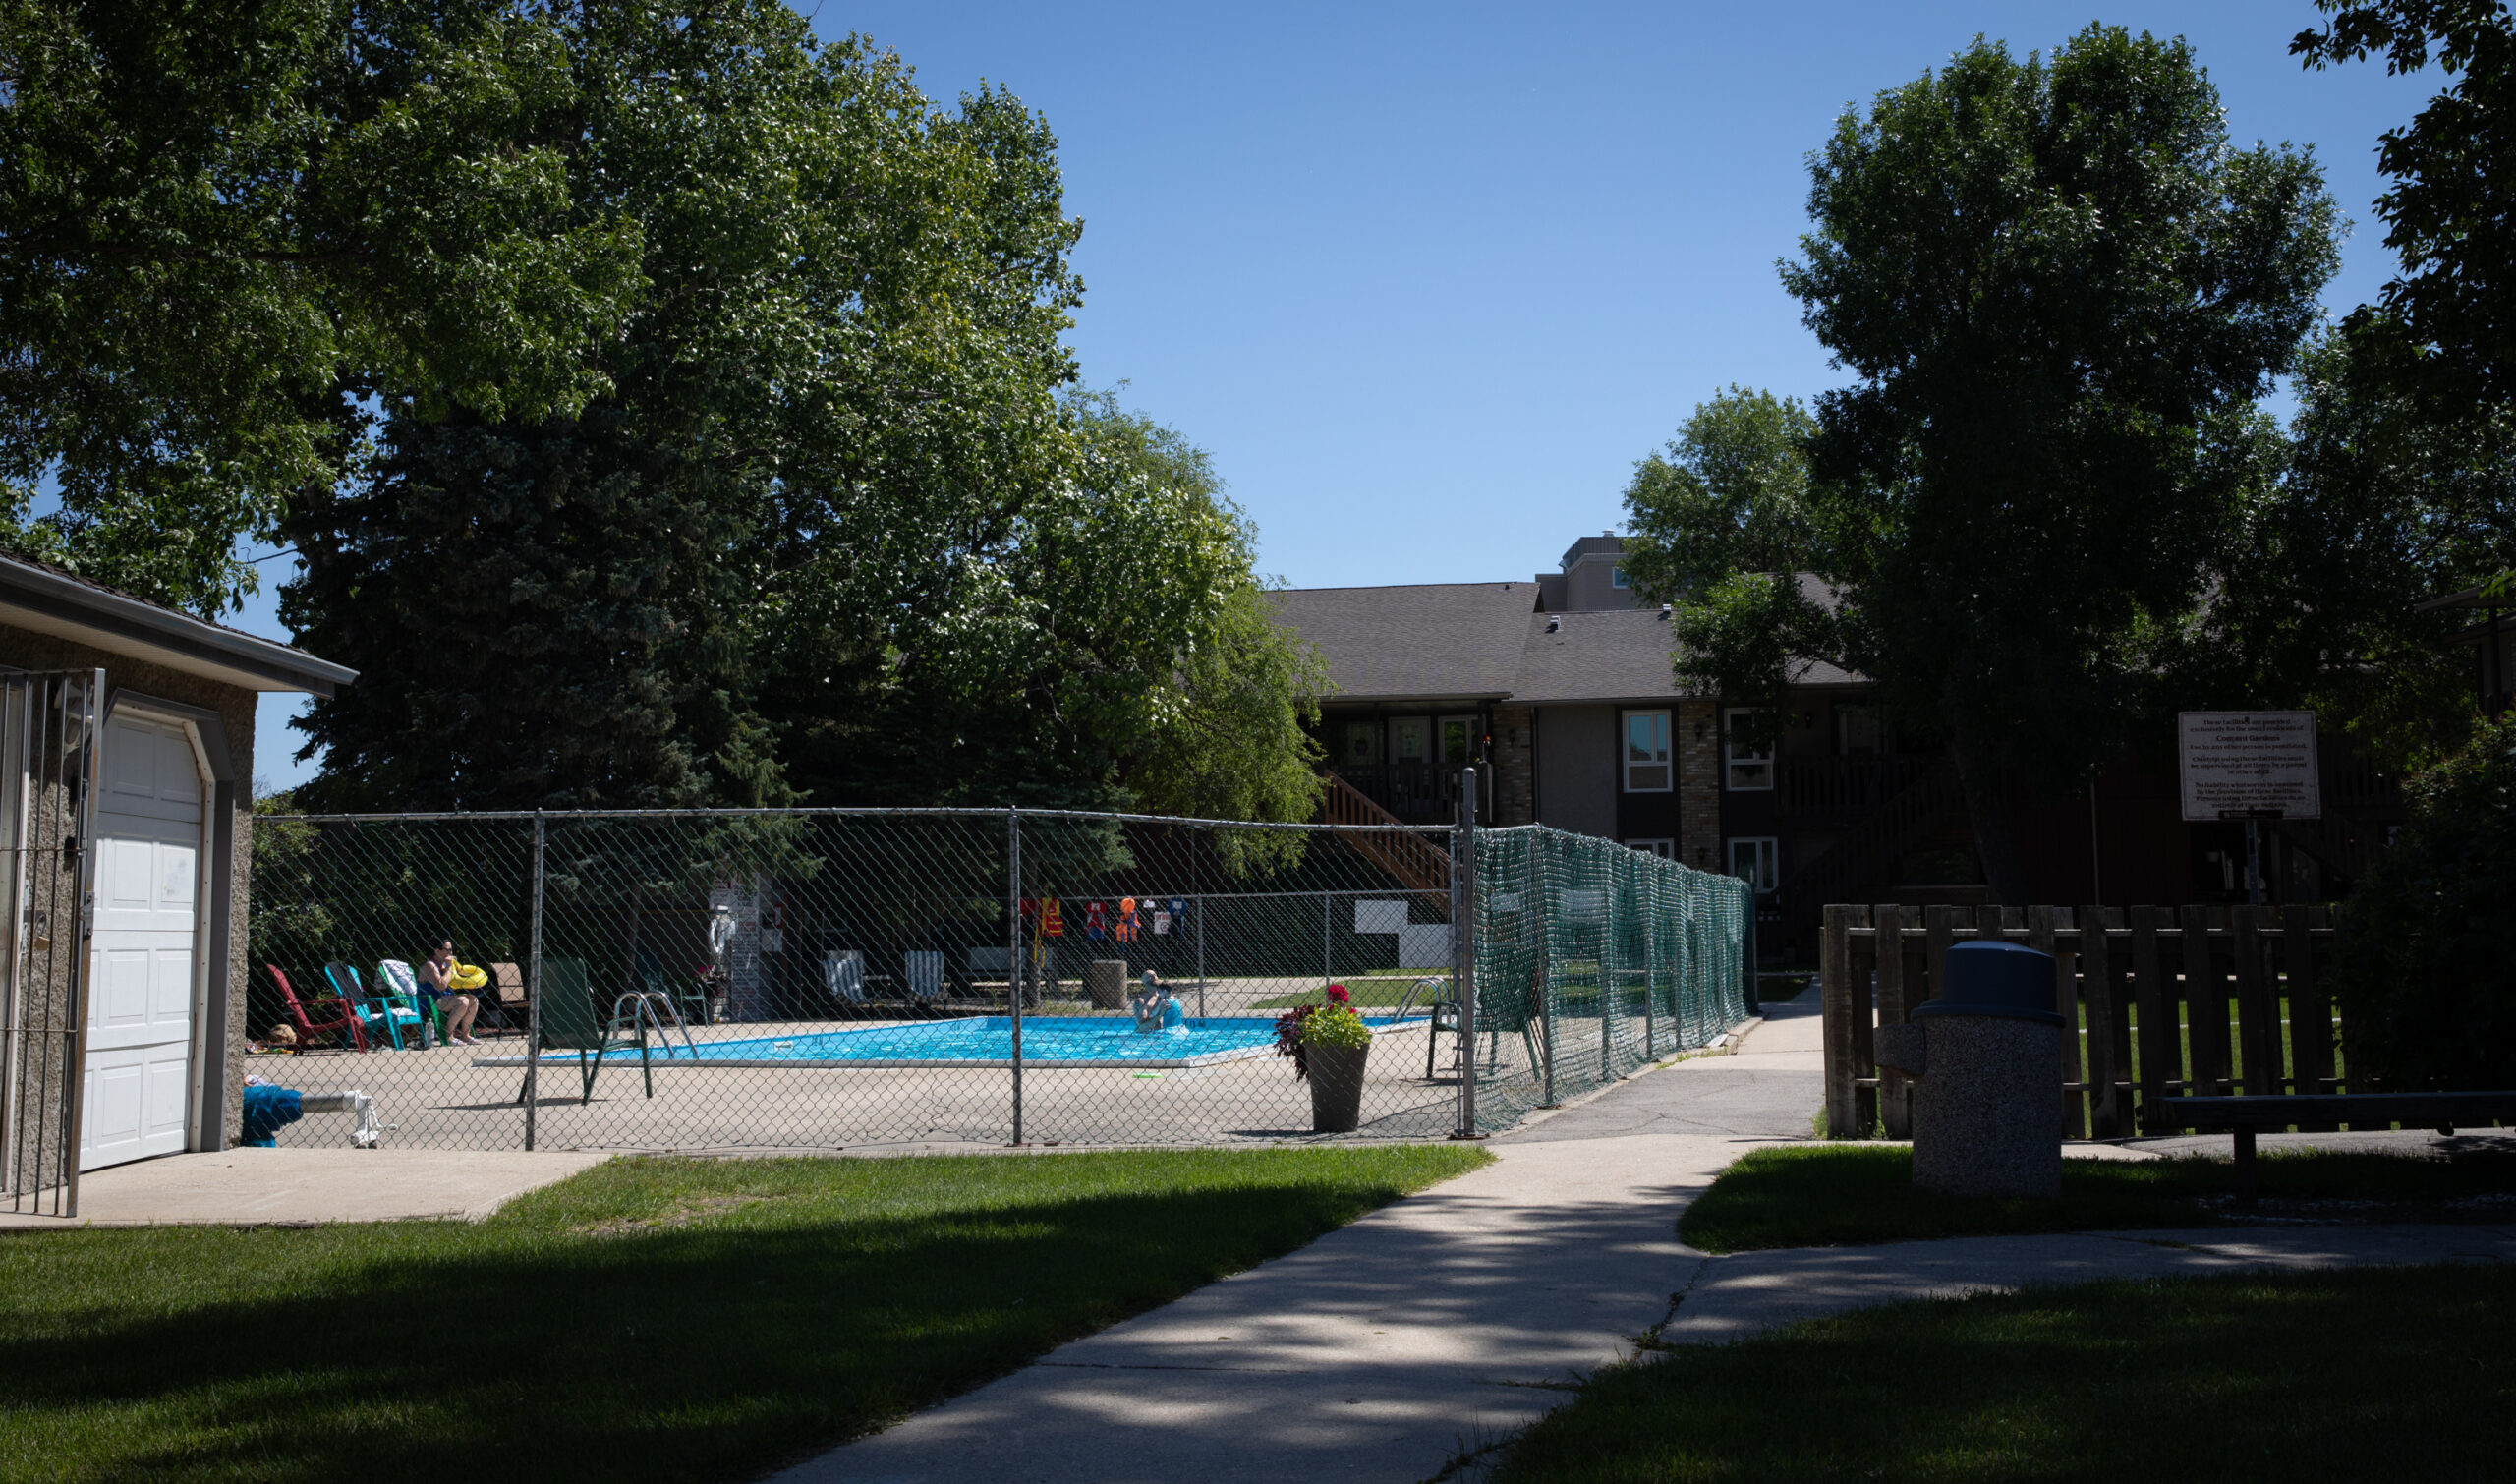 The swimming pool at Concord Gardens residential complex at 957 Concordia Avenue